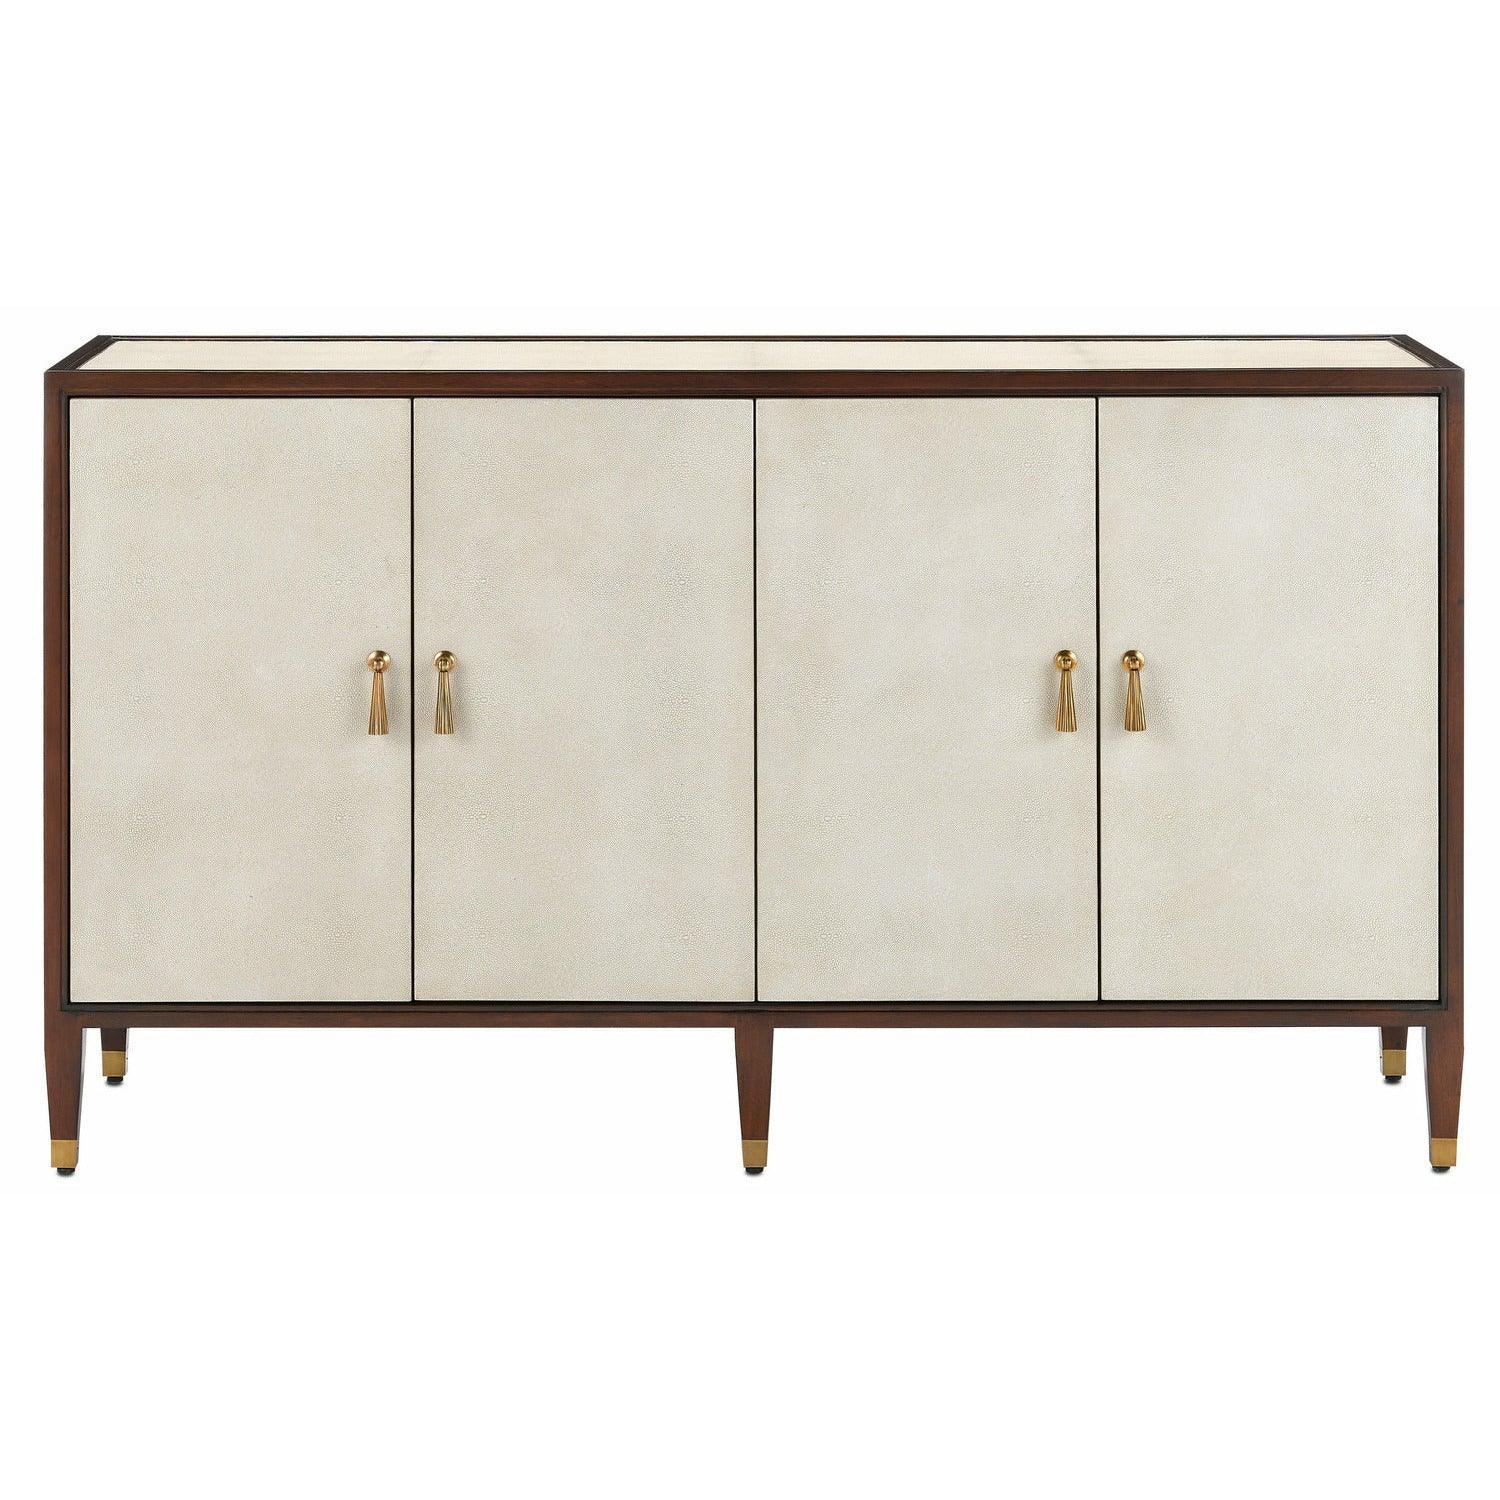 Currey and Company - Evie Credenza - 3000-0142 | Montreal Lighting & Hardware